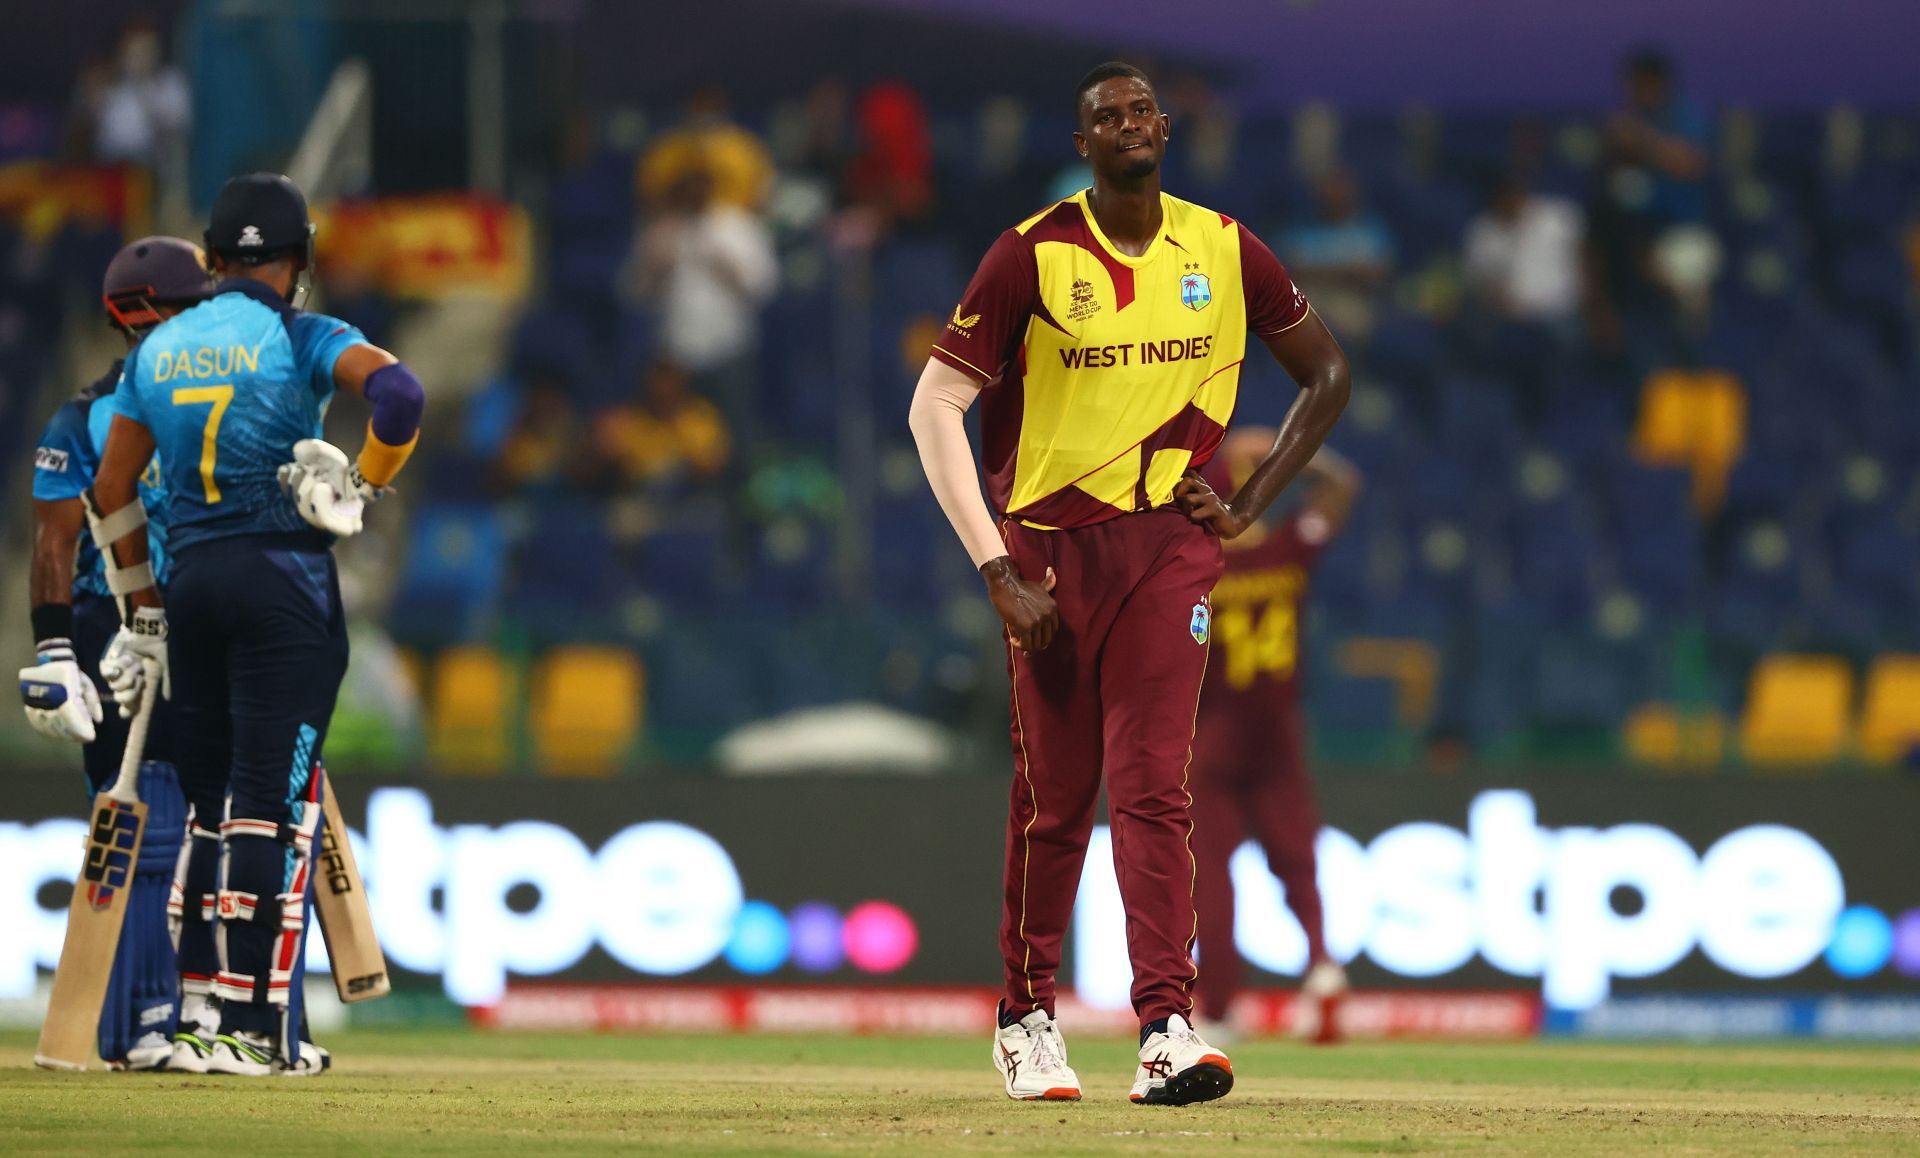 Jason Holder was not included in the squad for the West Indies&#039; limited over series against Pakistan.